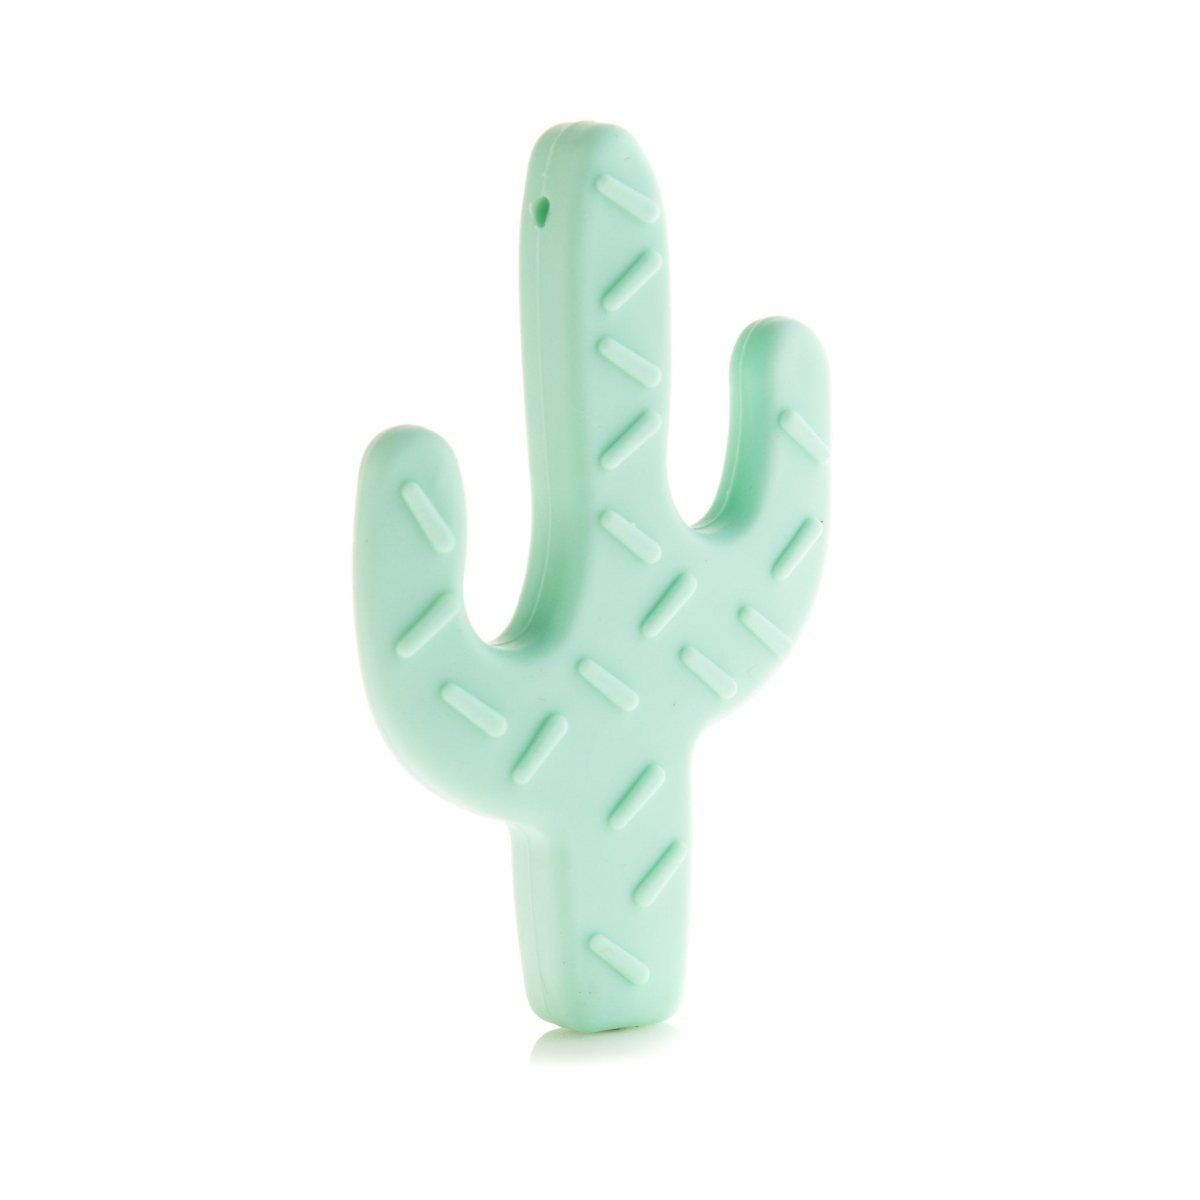 Silicone Teethers and Pendants Cactus Mint from Cara & Co Craft Supply